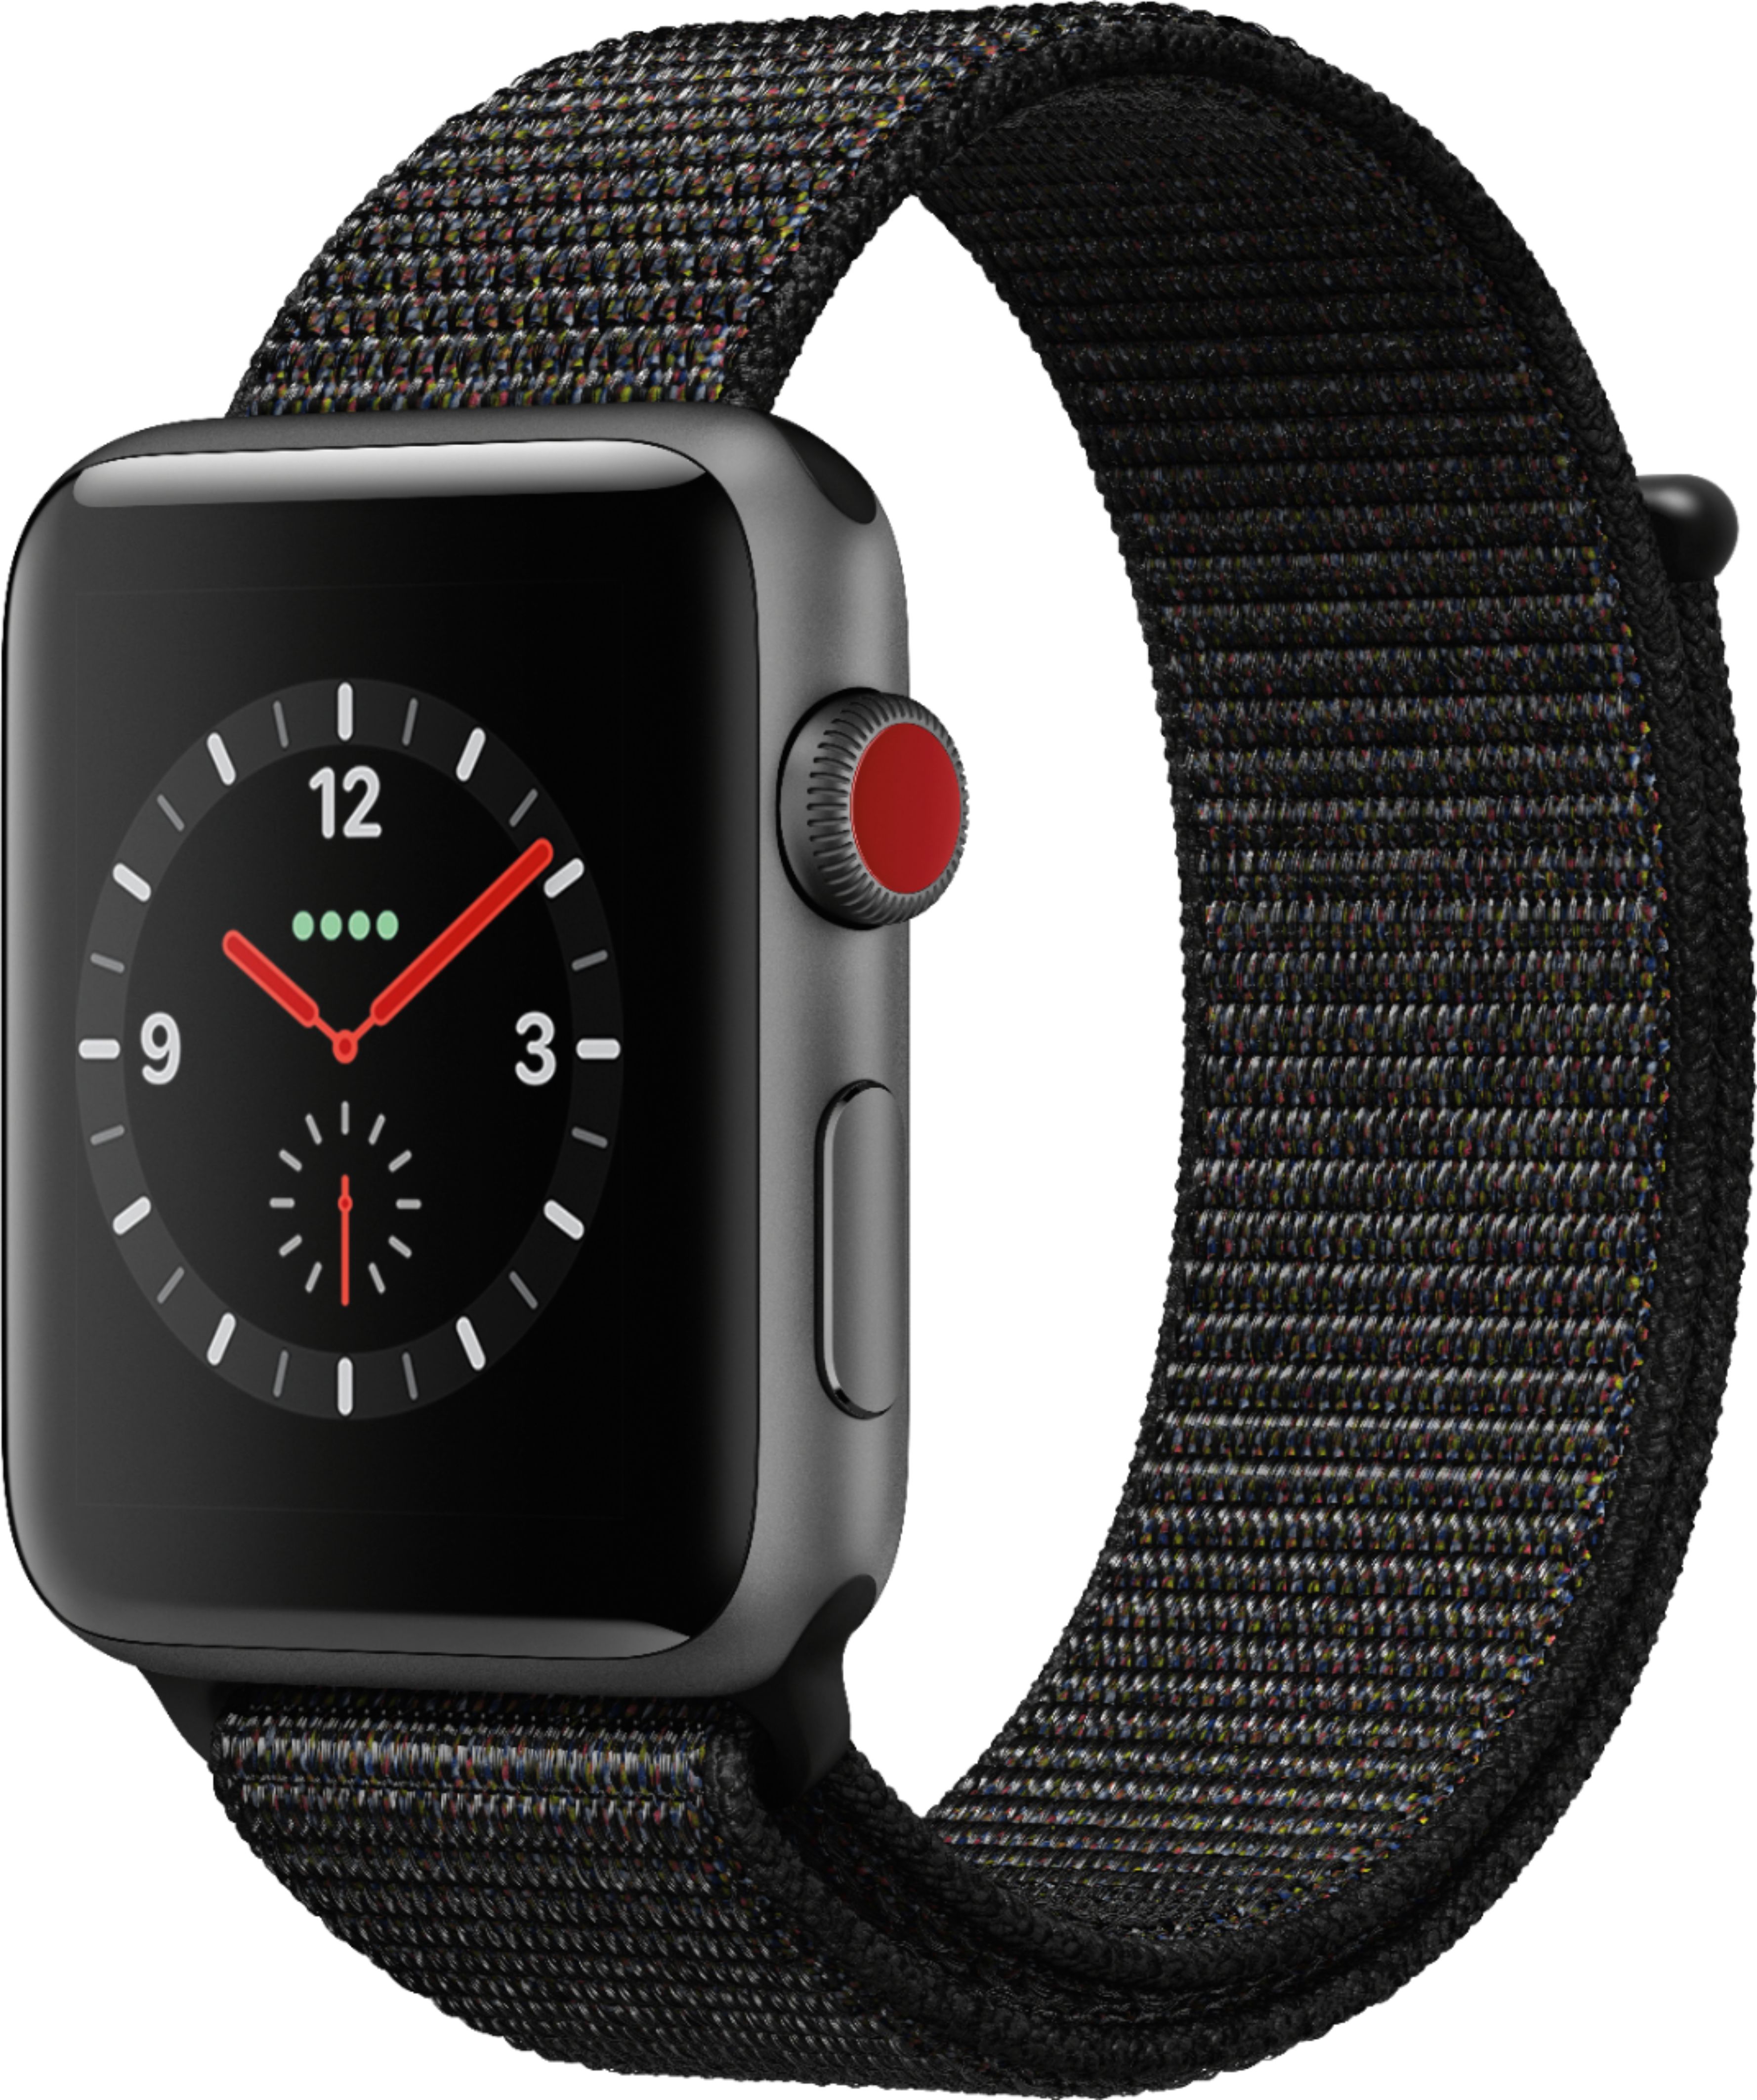 Best Buy: Apple Watch Series 3 (GPS + Cellular) 42mm Space Gray Aluminum  Case with Black Sport Loop Space Gray Aluminum MRQF2LL/A